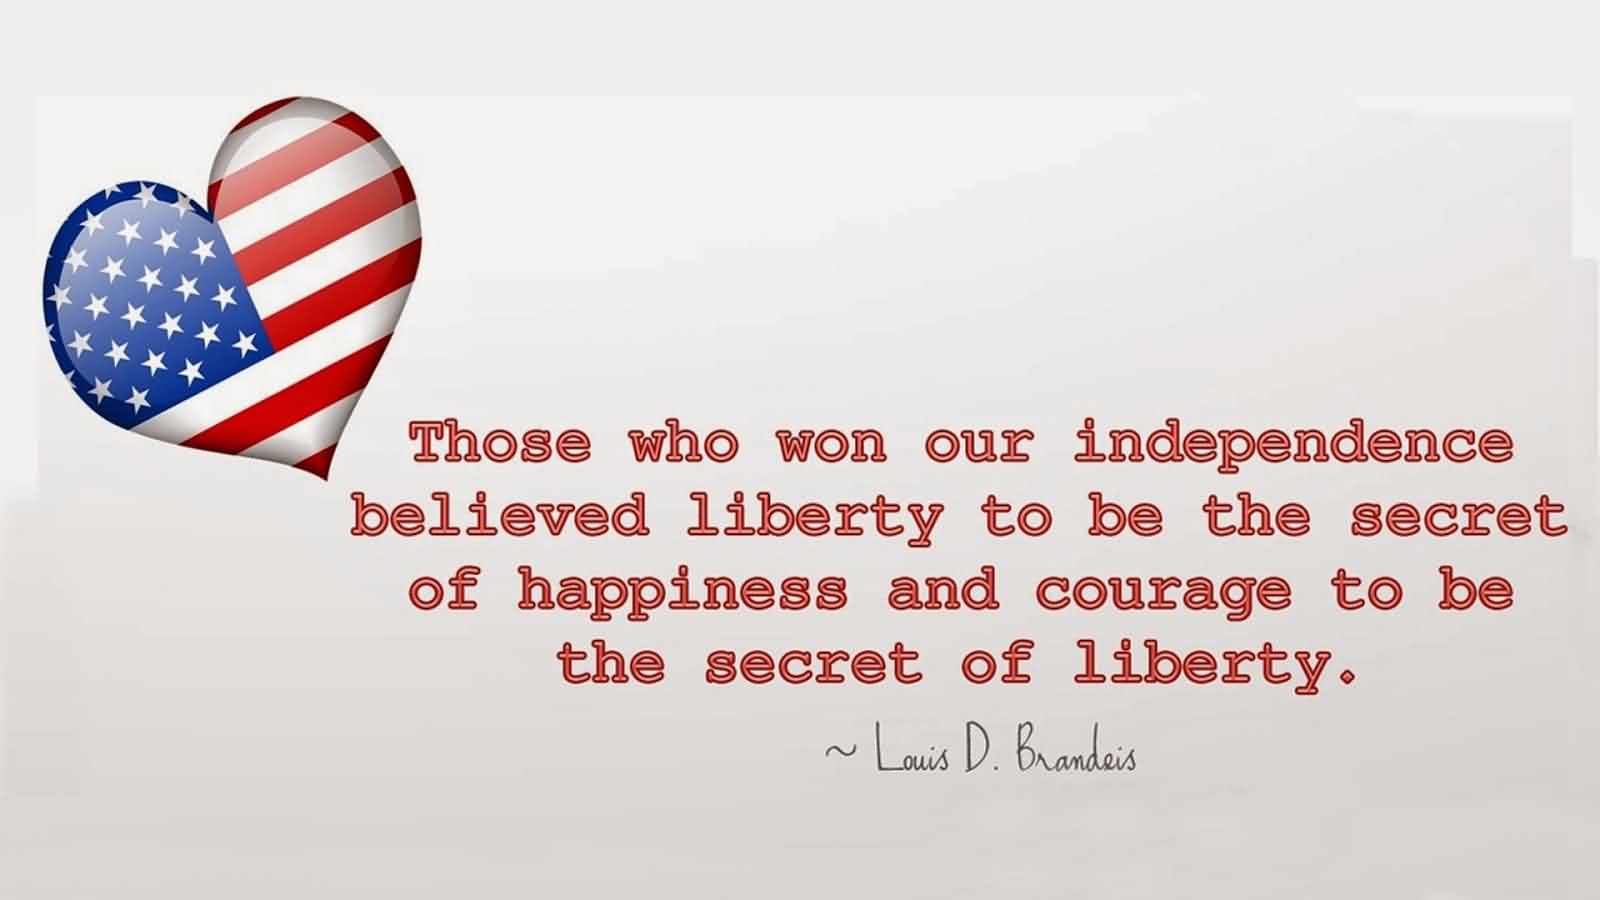 The Fourth of July Independence Day Quotes By Louis D. Brandeis Wishes Message Image